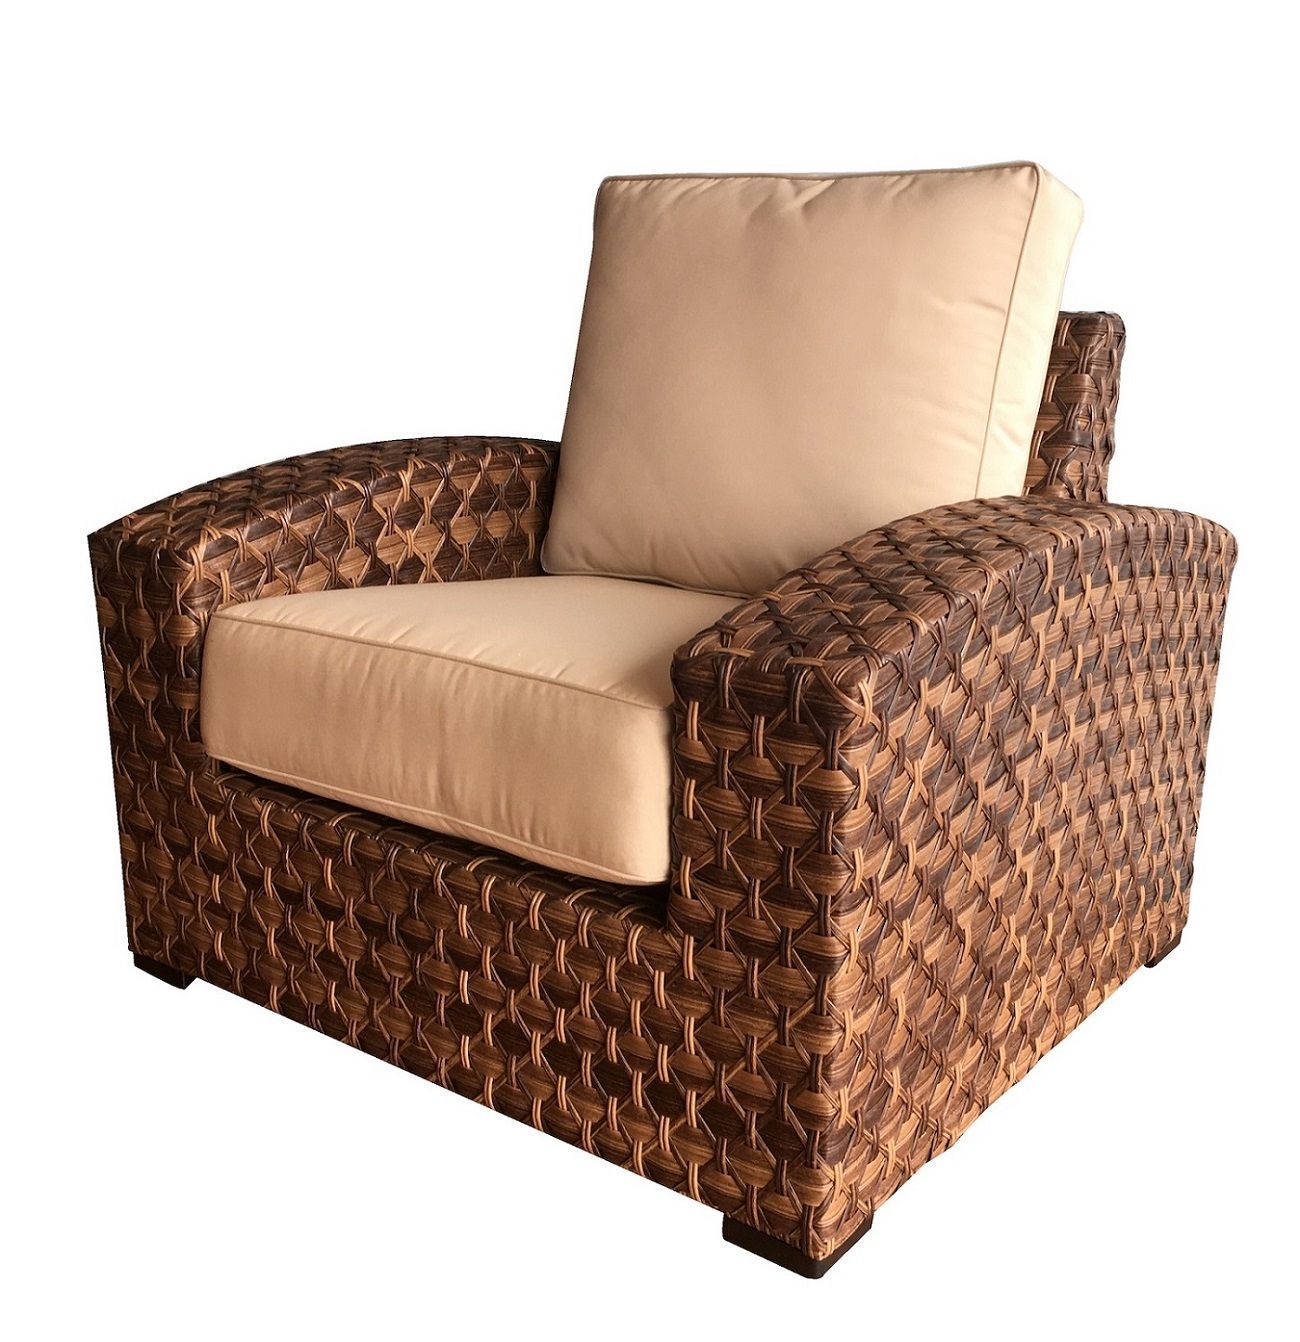 Westbury Outdoor Wicker Chair | Outdoor Wicker Chairs, Wicker Swivel Regarding Natural Woven Outdoor Chairs Sets (View 12 of 15)